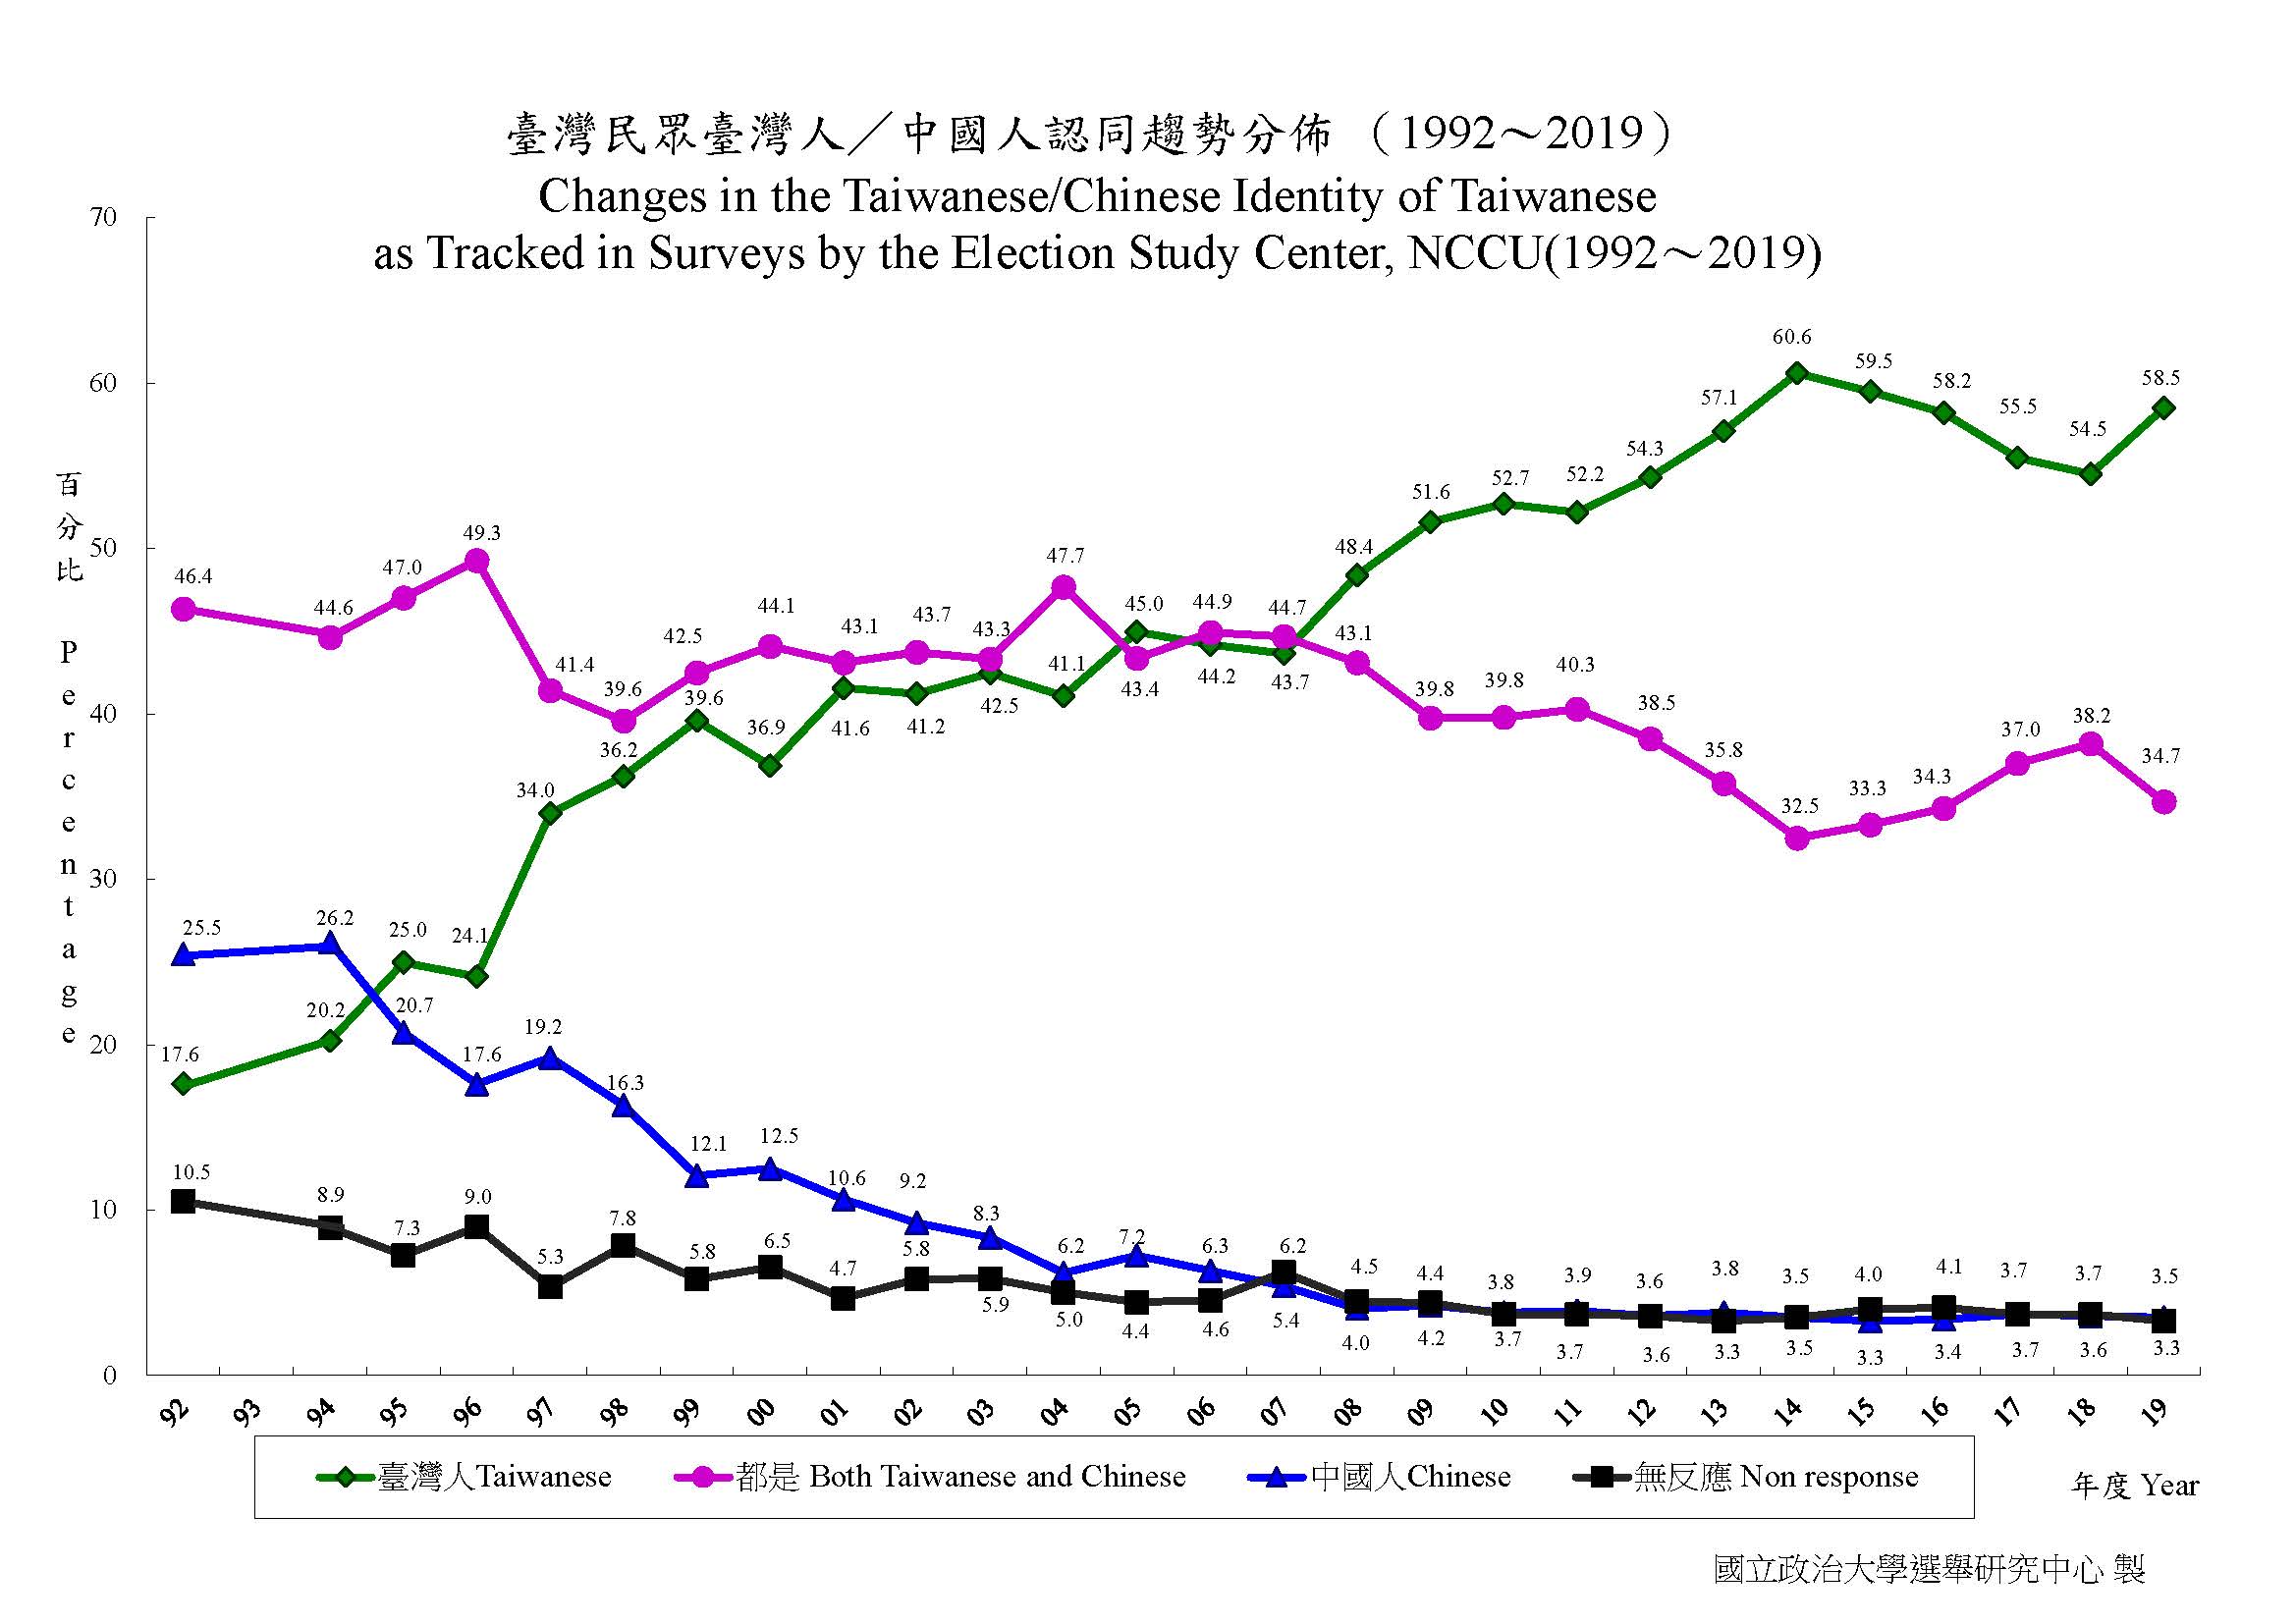 Graph showing changes in perceptions of Taiwanese identity from 1992 to 2019